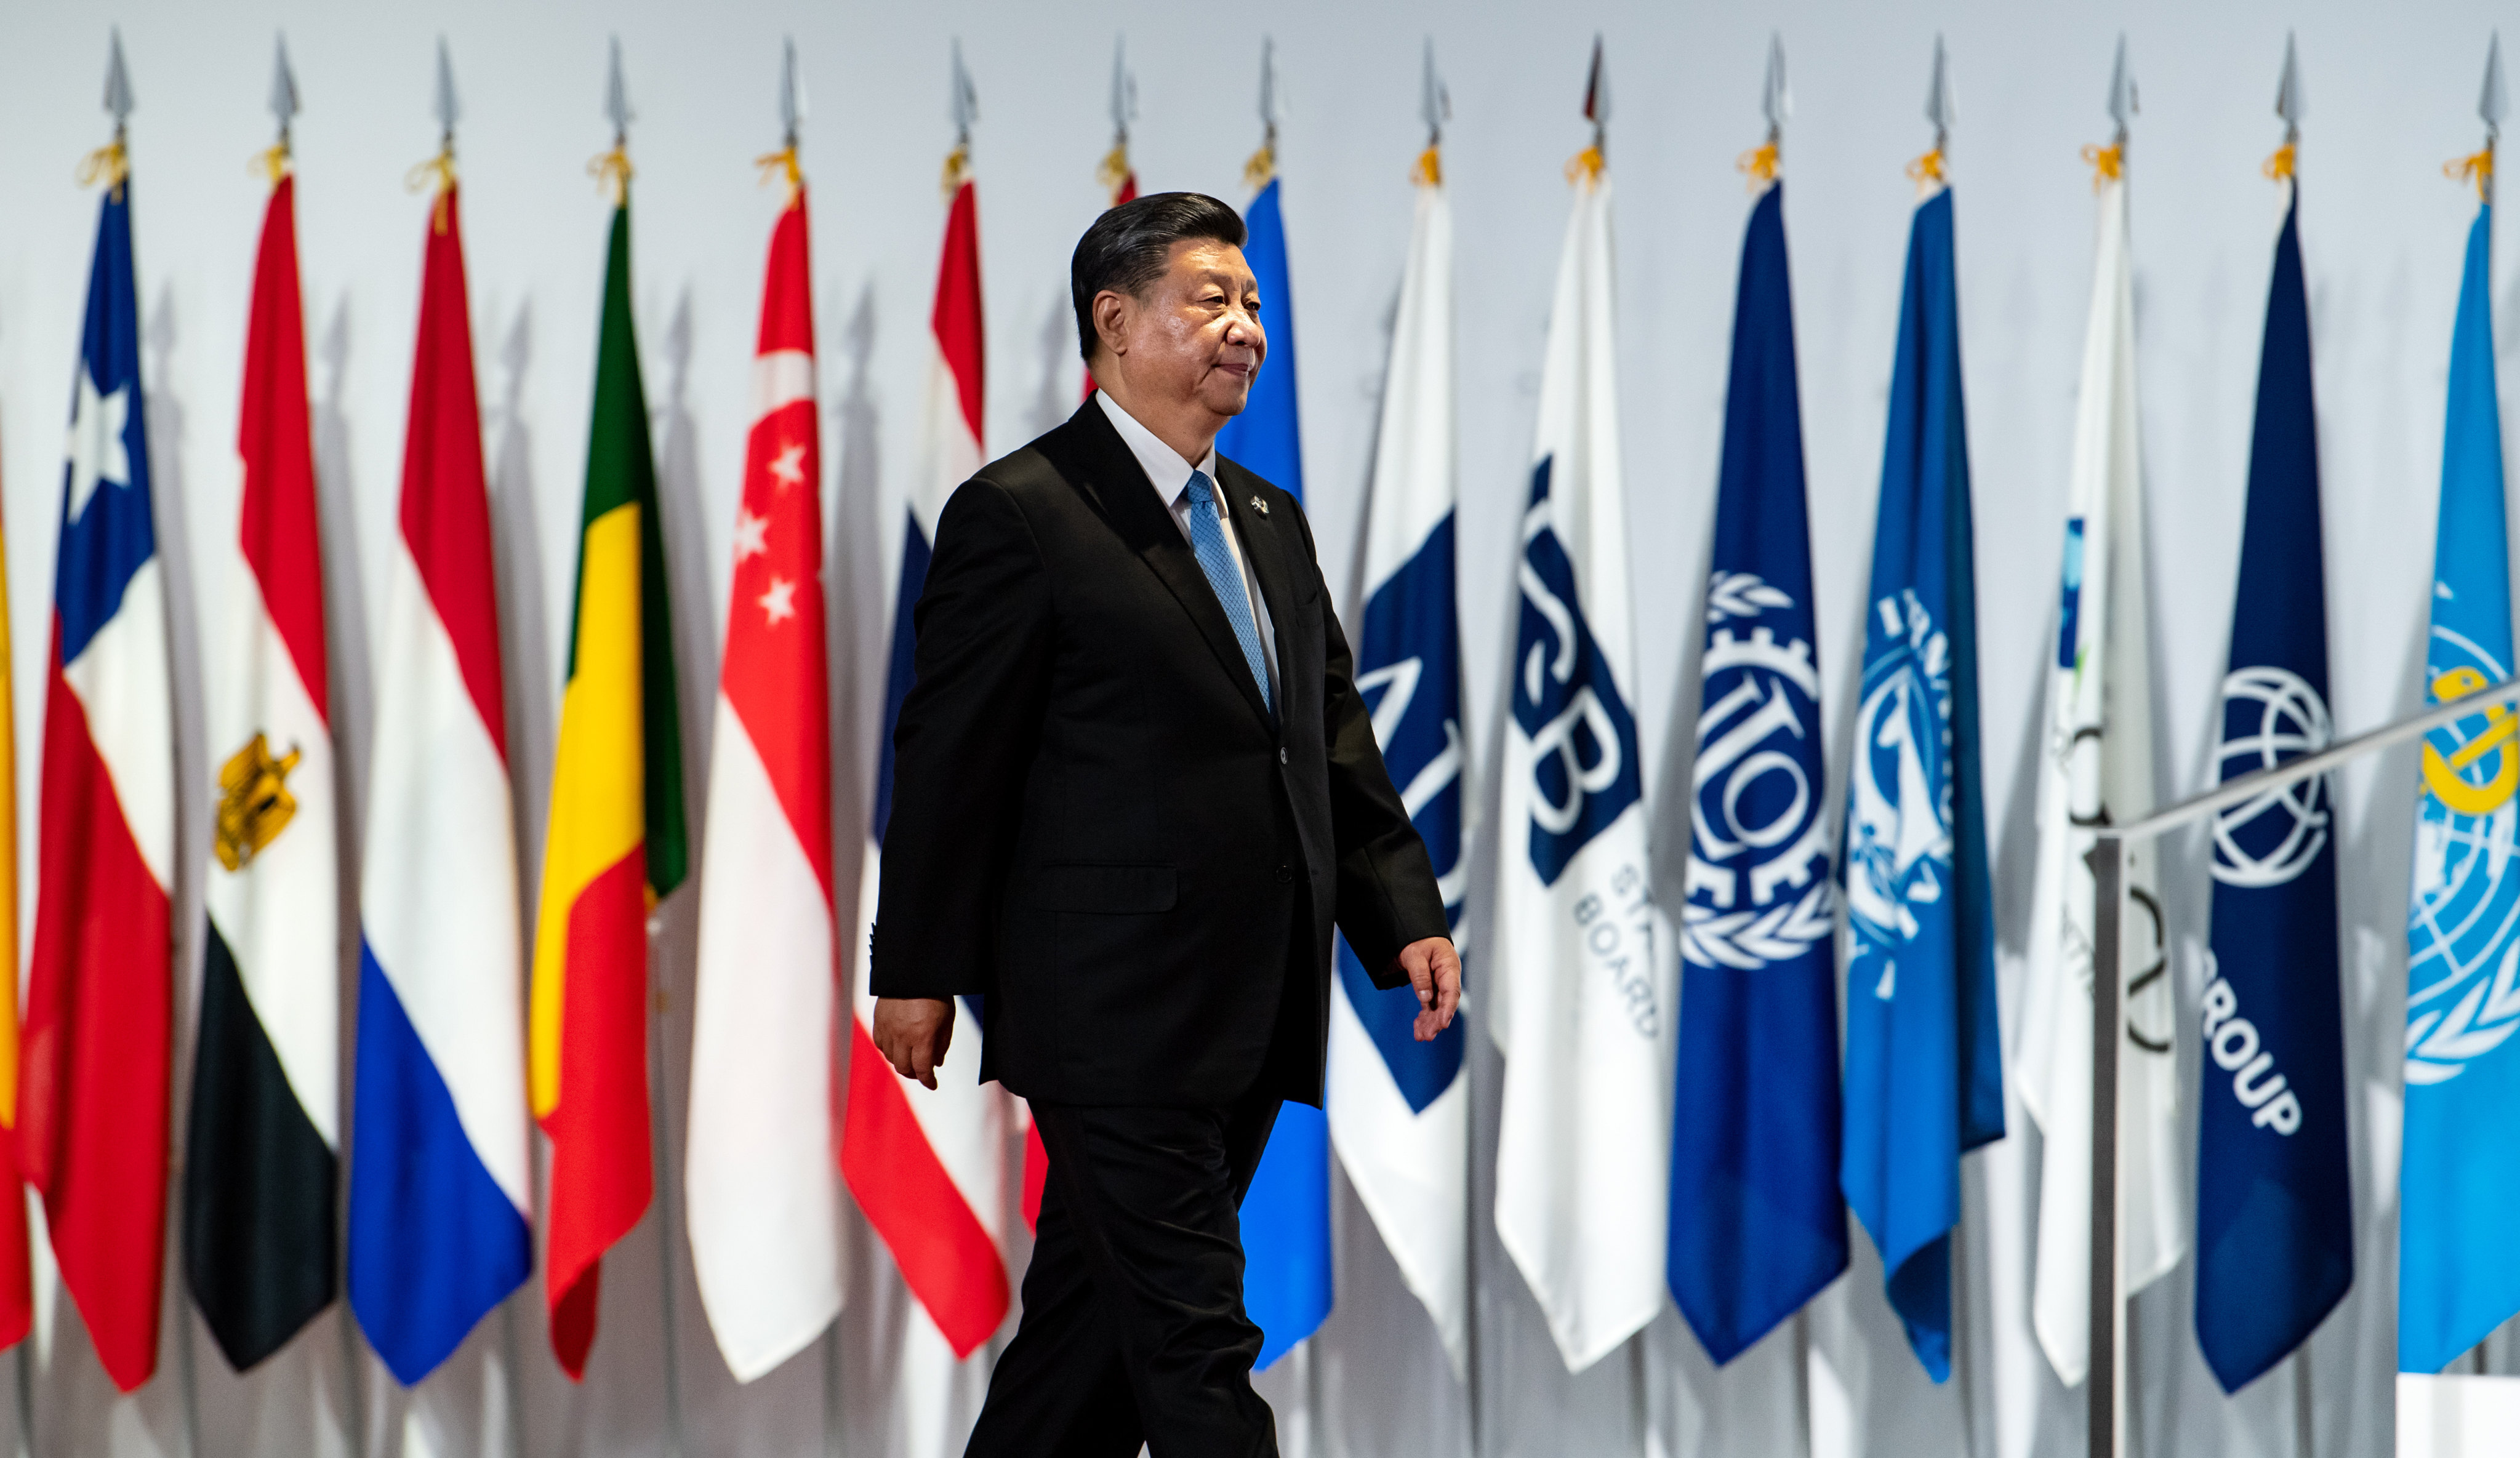 Chinese President Xi Jinping arrives at the welcome ceremony of the G20 summit in Osaka on June 28, 2019. Xi will not attend the upcoming G20 leaders’ summit in Rome in person this year. Photo: DPA